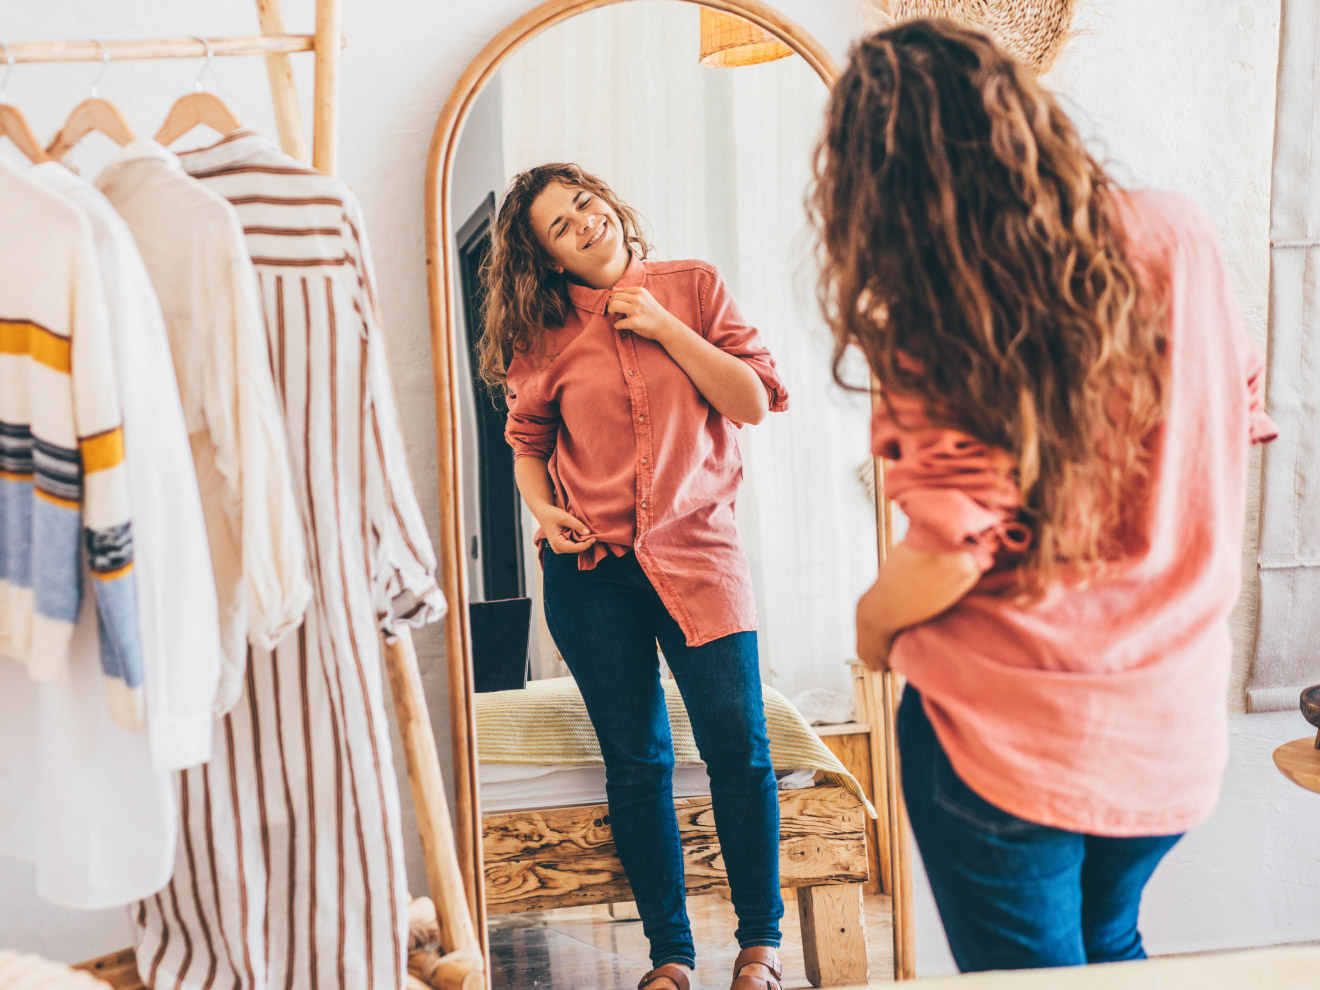 A woman examines her outfit in the mirror: a flowy shirt with dark wash jeans, fashionable but functional for handling leaks.